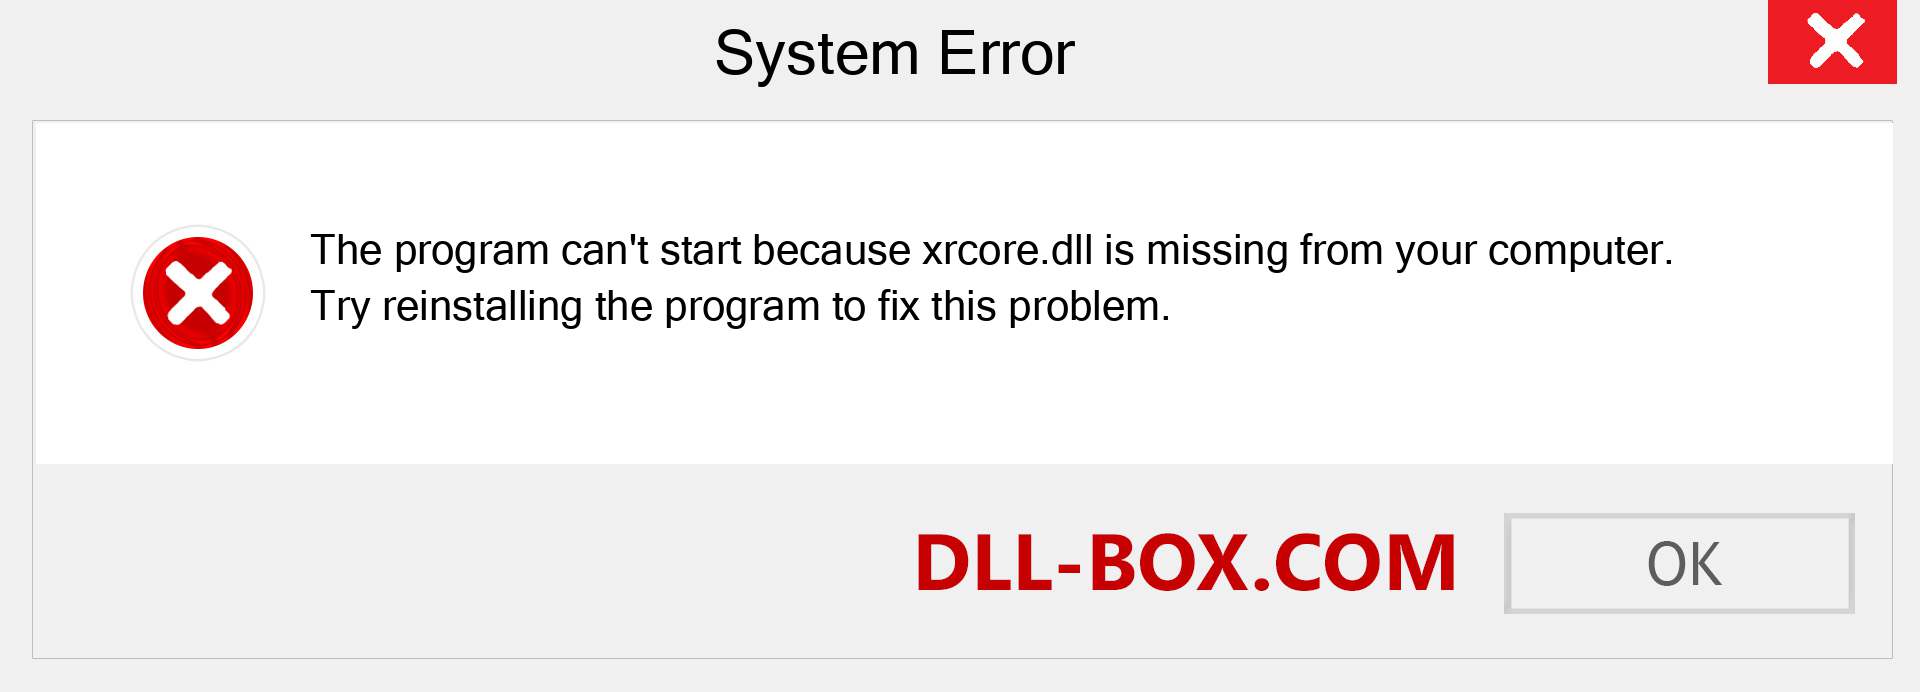  xrcore.dll file is missing?. Download for Windows 7, 8, 10 - Fix  xrcore dll Missing Error on Windows, photos, images